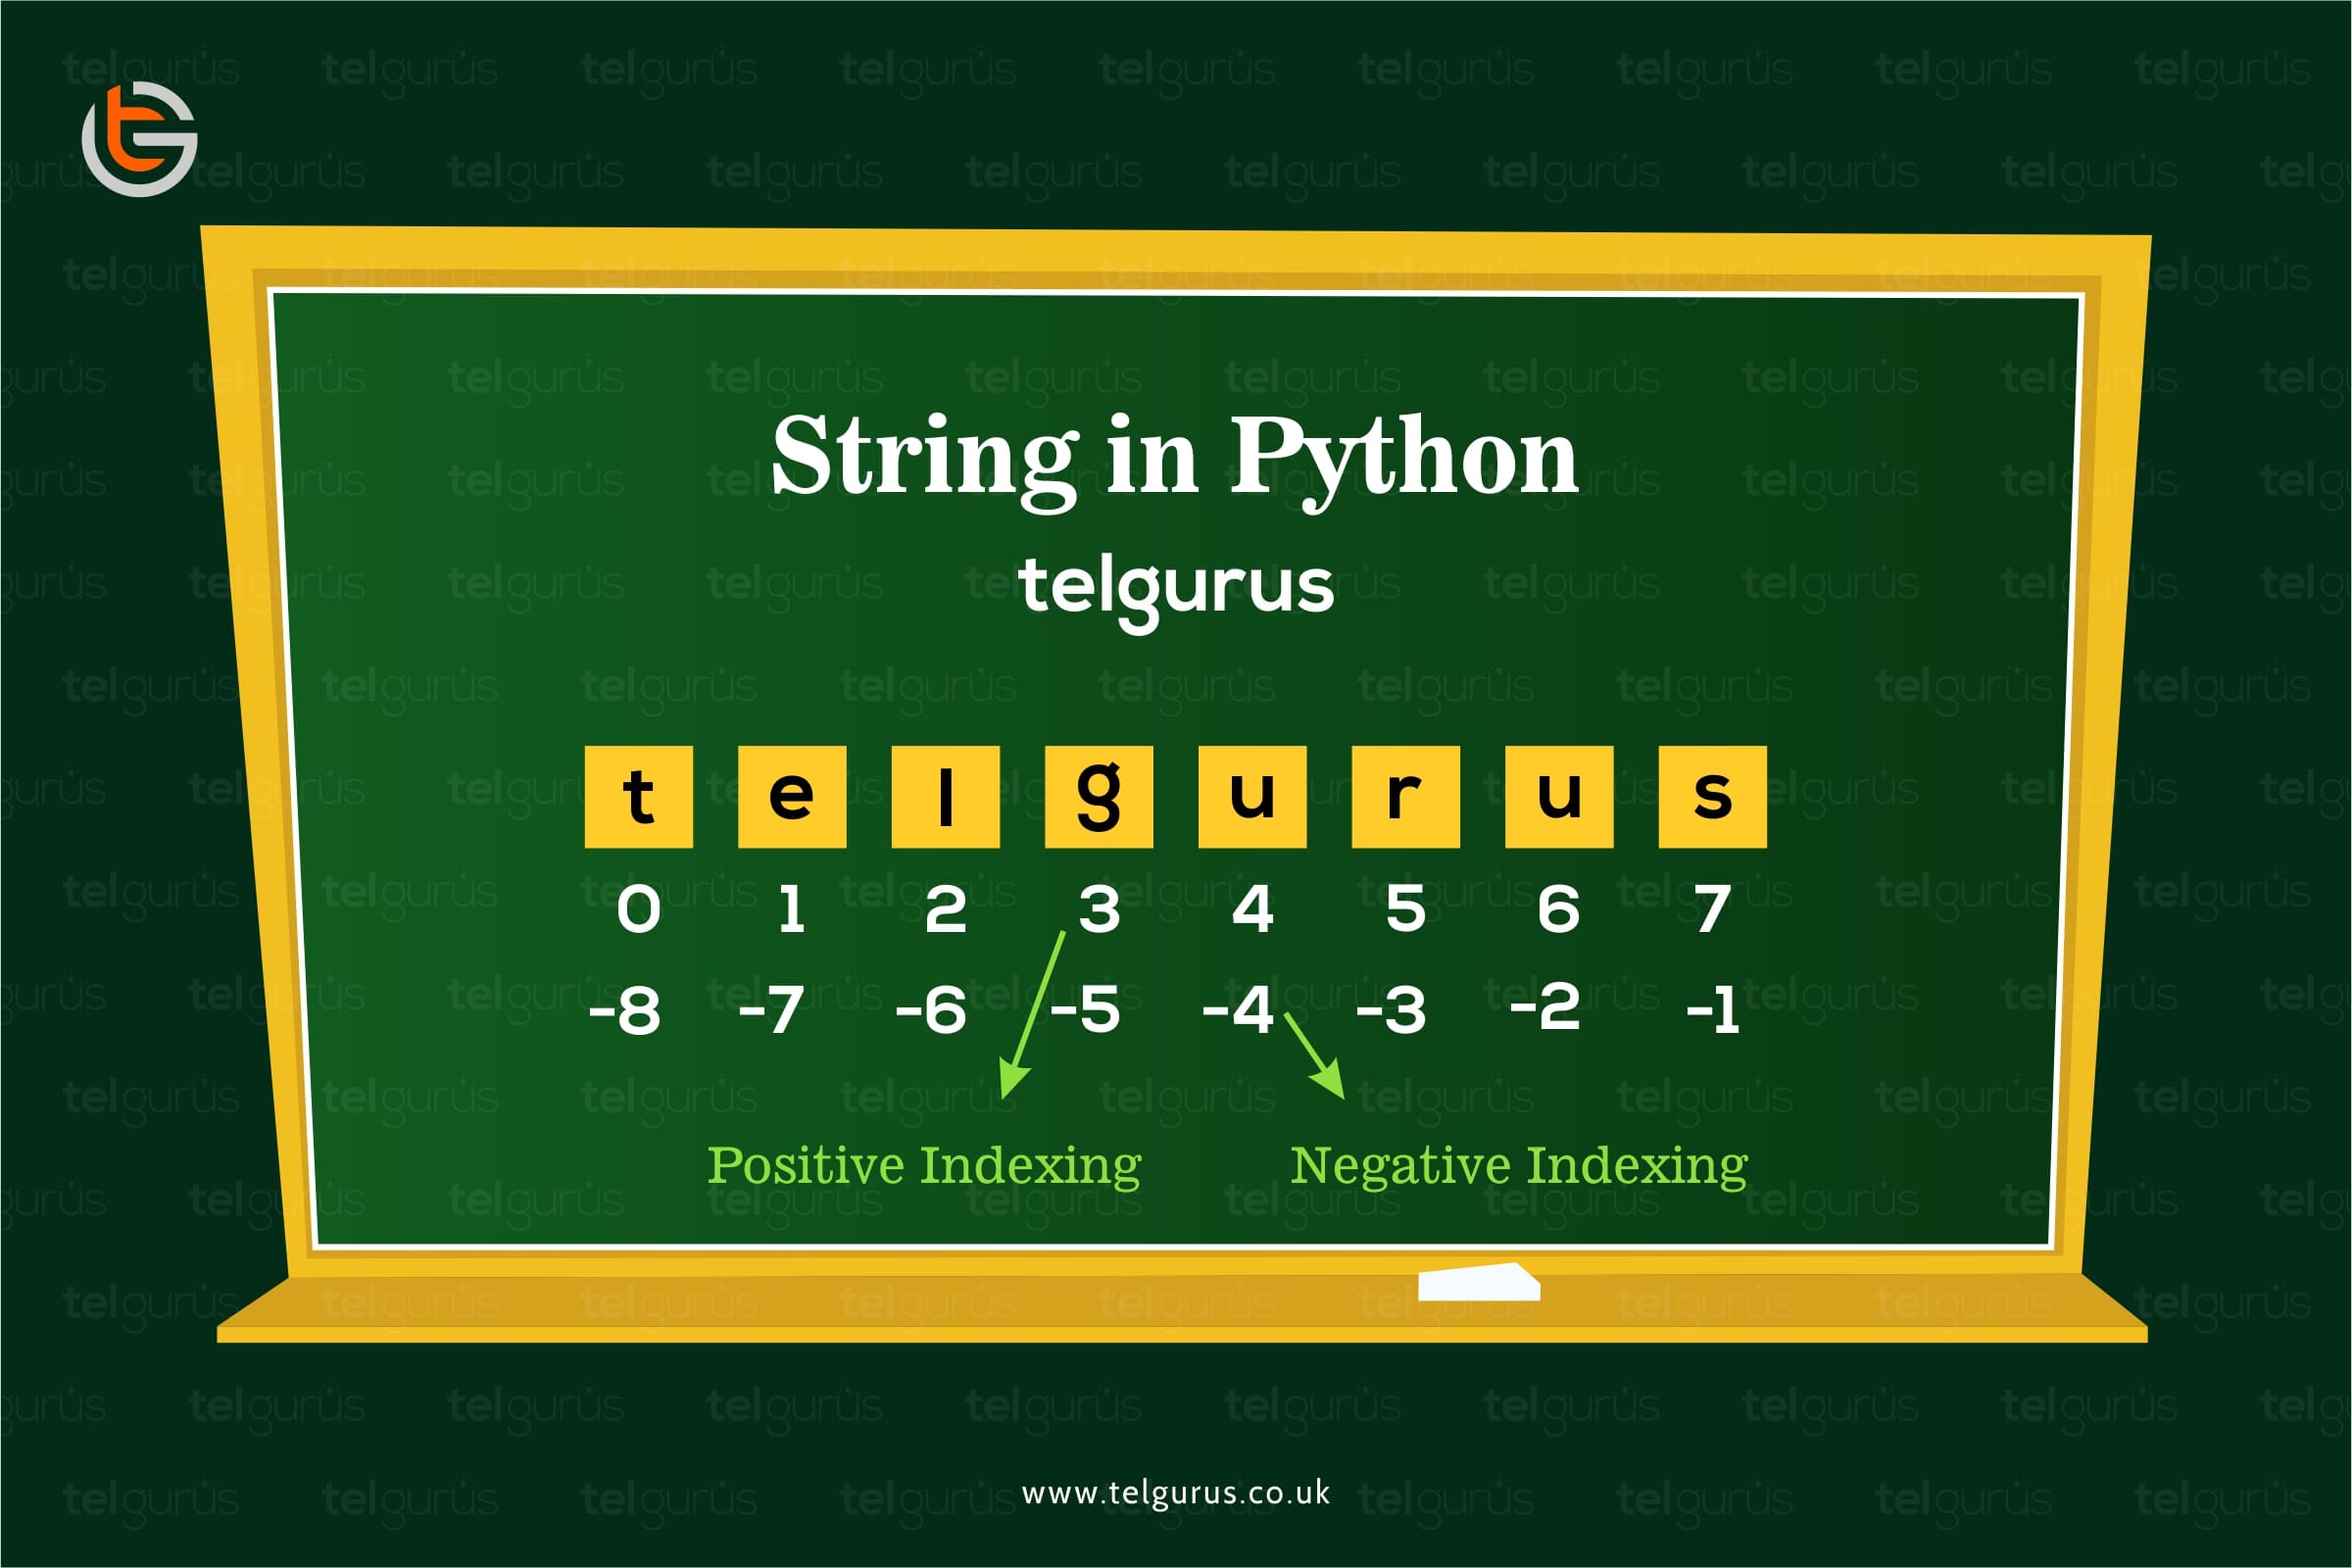 What are strings in python